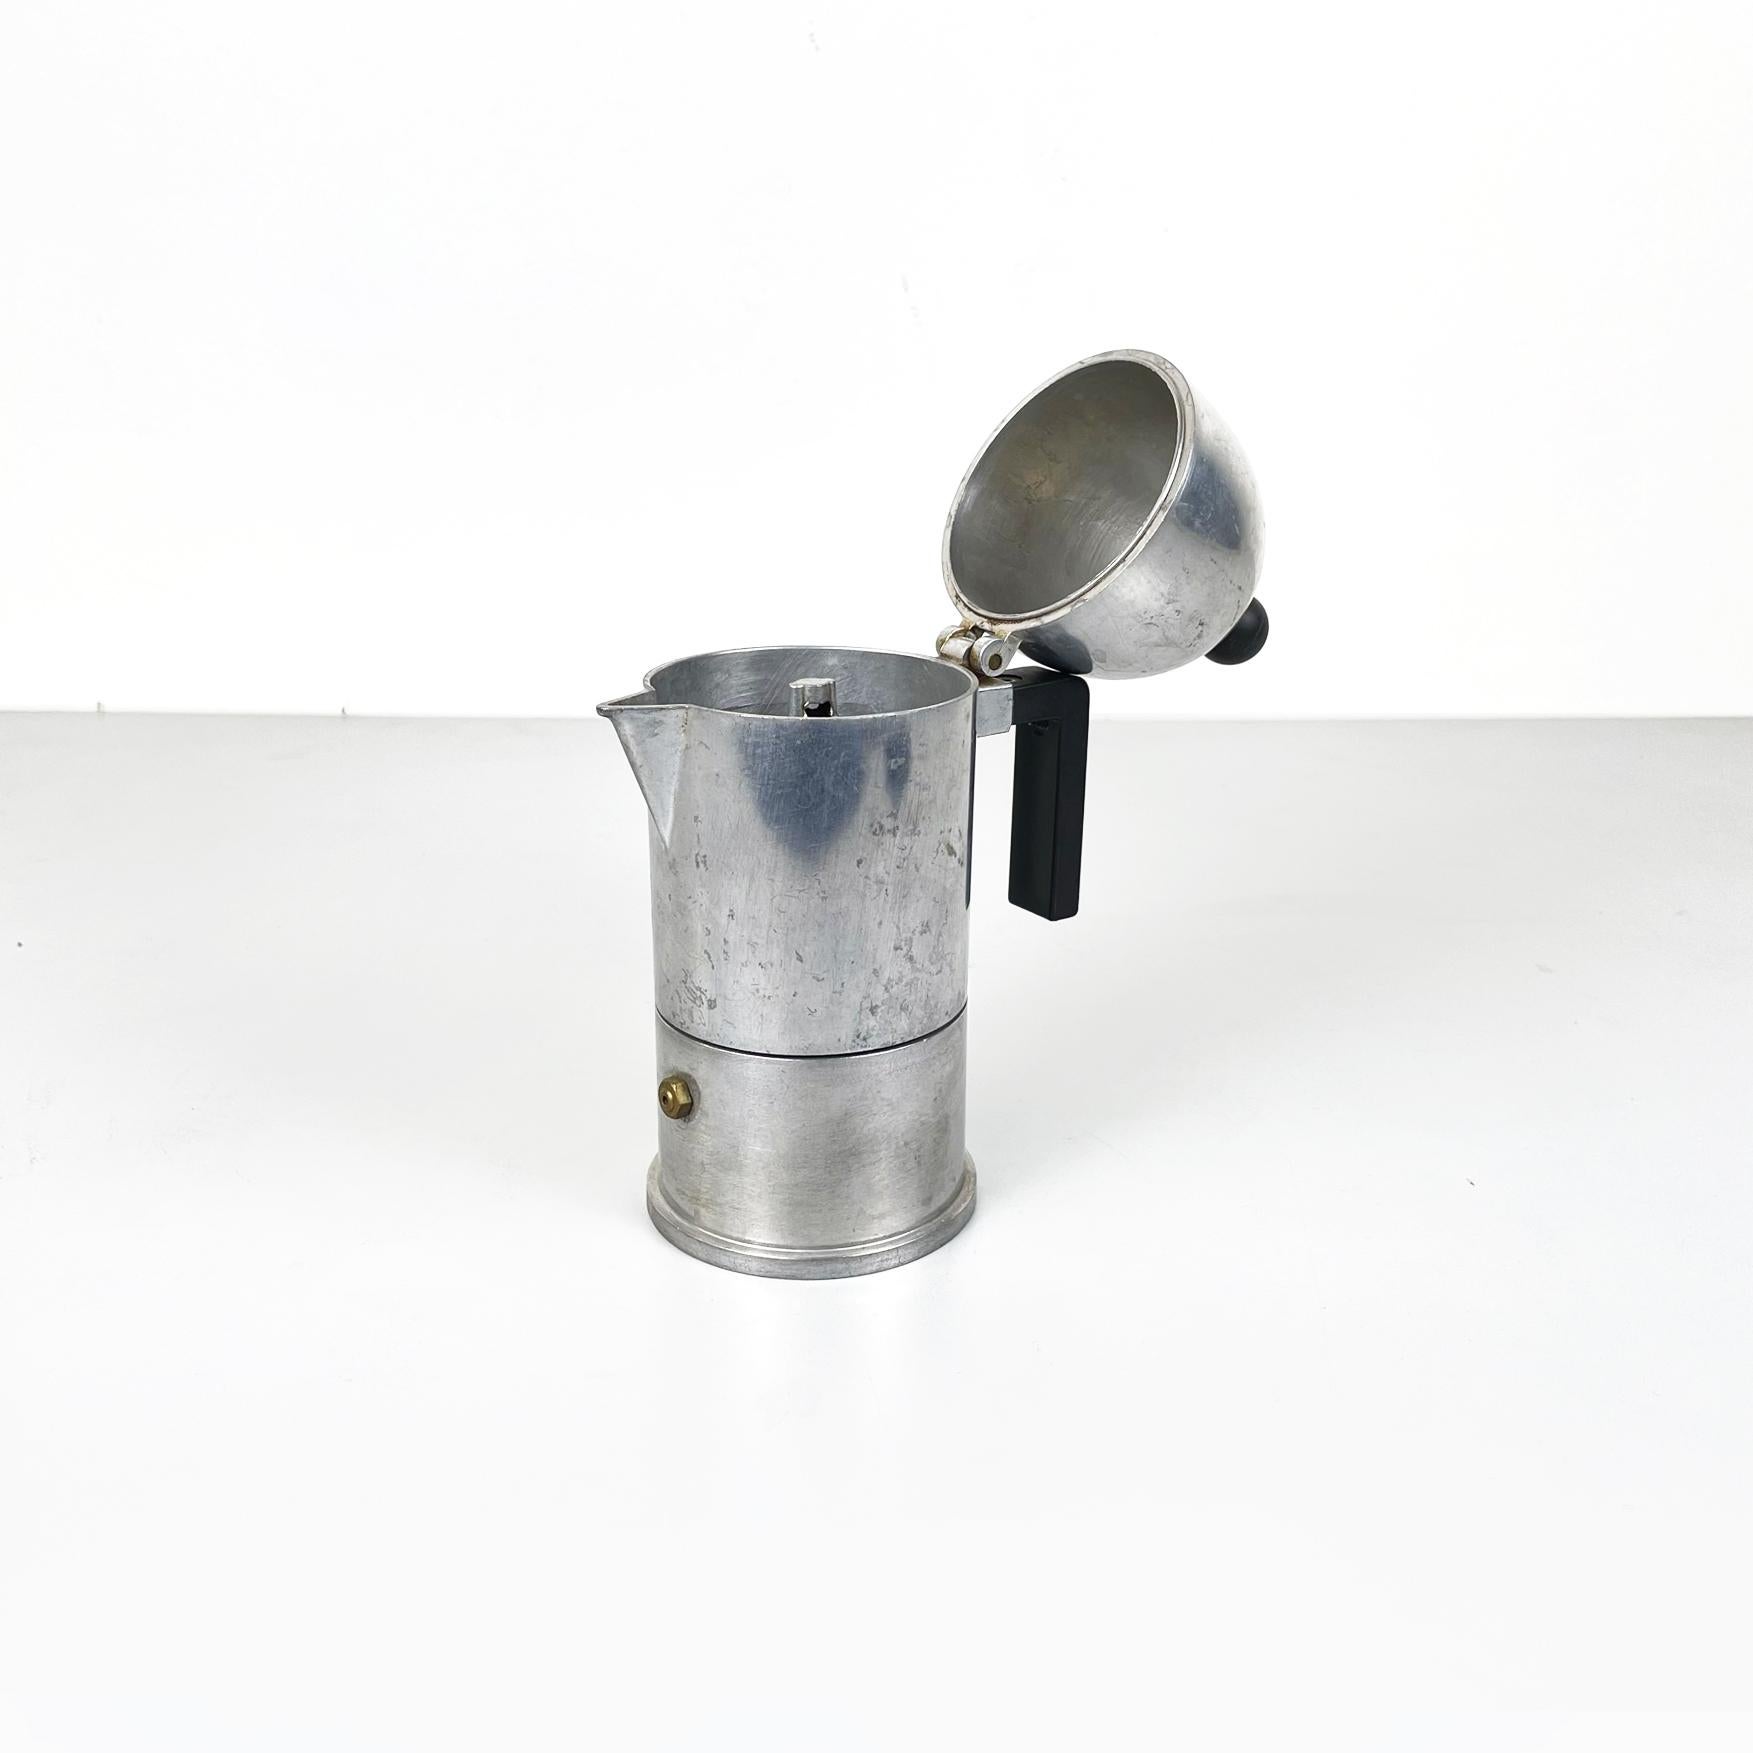 Italian modern Espresso coffee maker La Cupola by Aldo Rossi for Alessi, 1990s
Espresso coffee maker mod. La Cupola with a round base in cast aluminium. It has a handle and a spherical knob on the top, in black plastic. On the front it has a